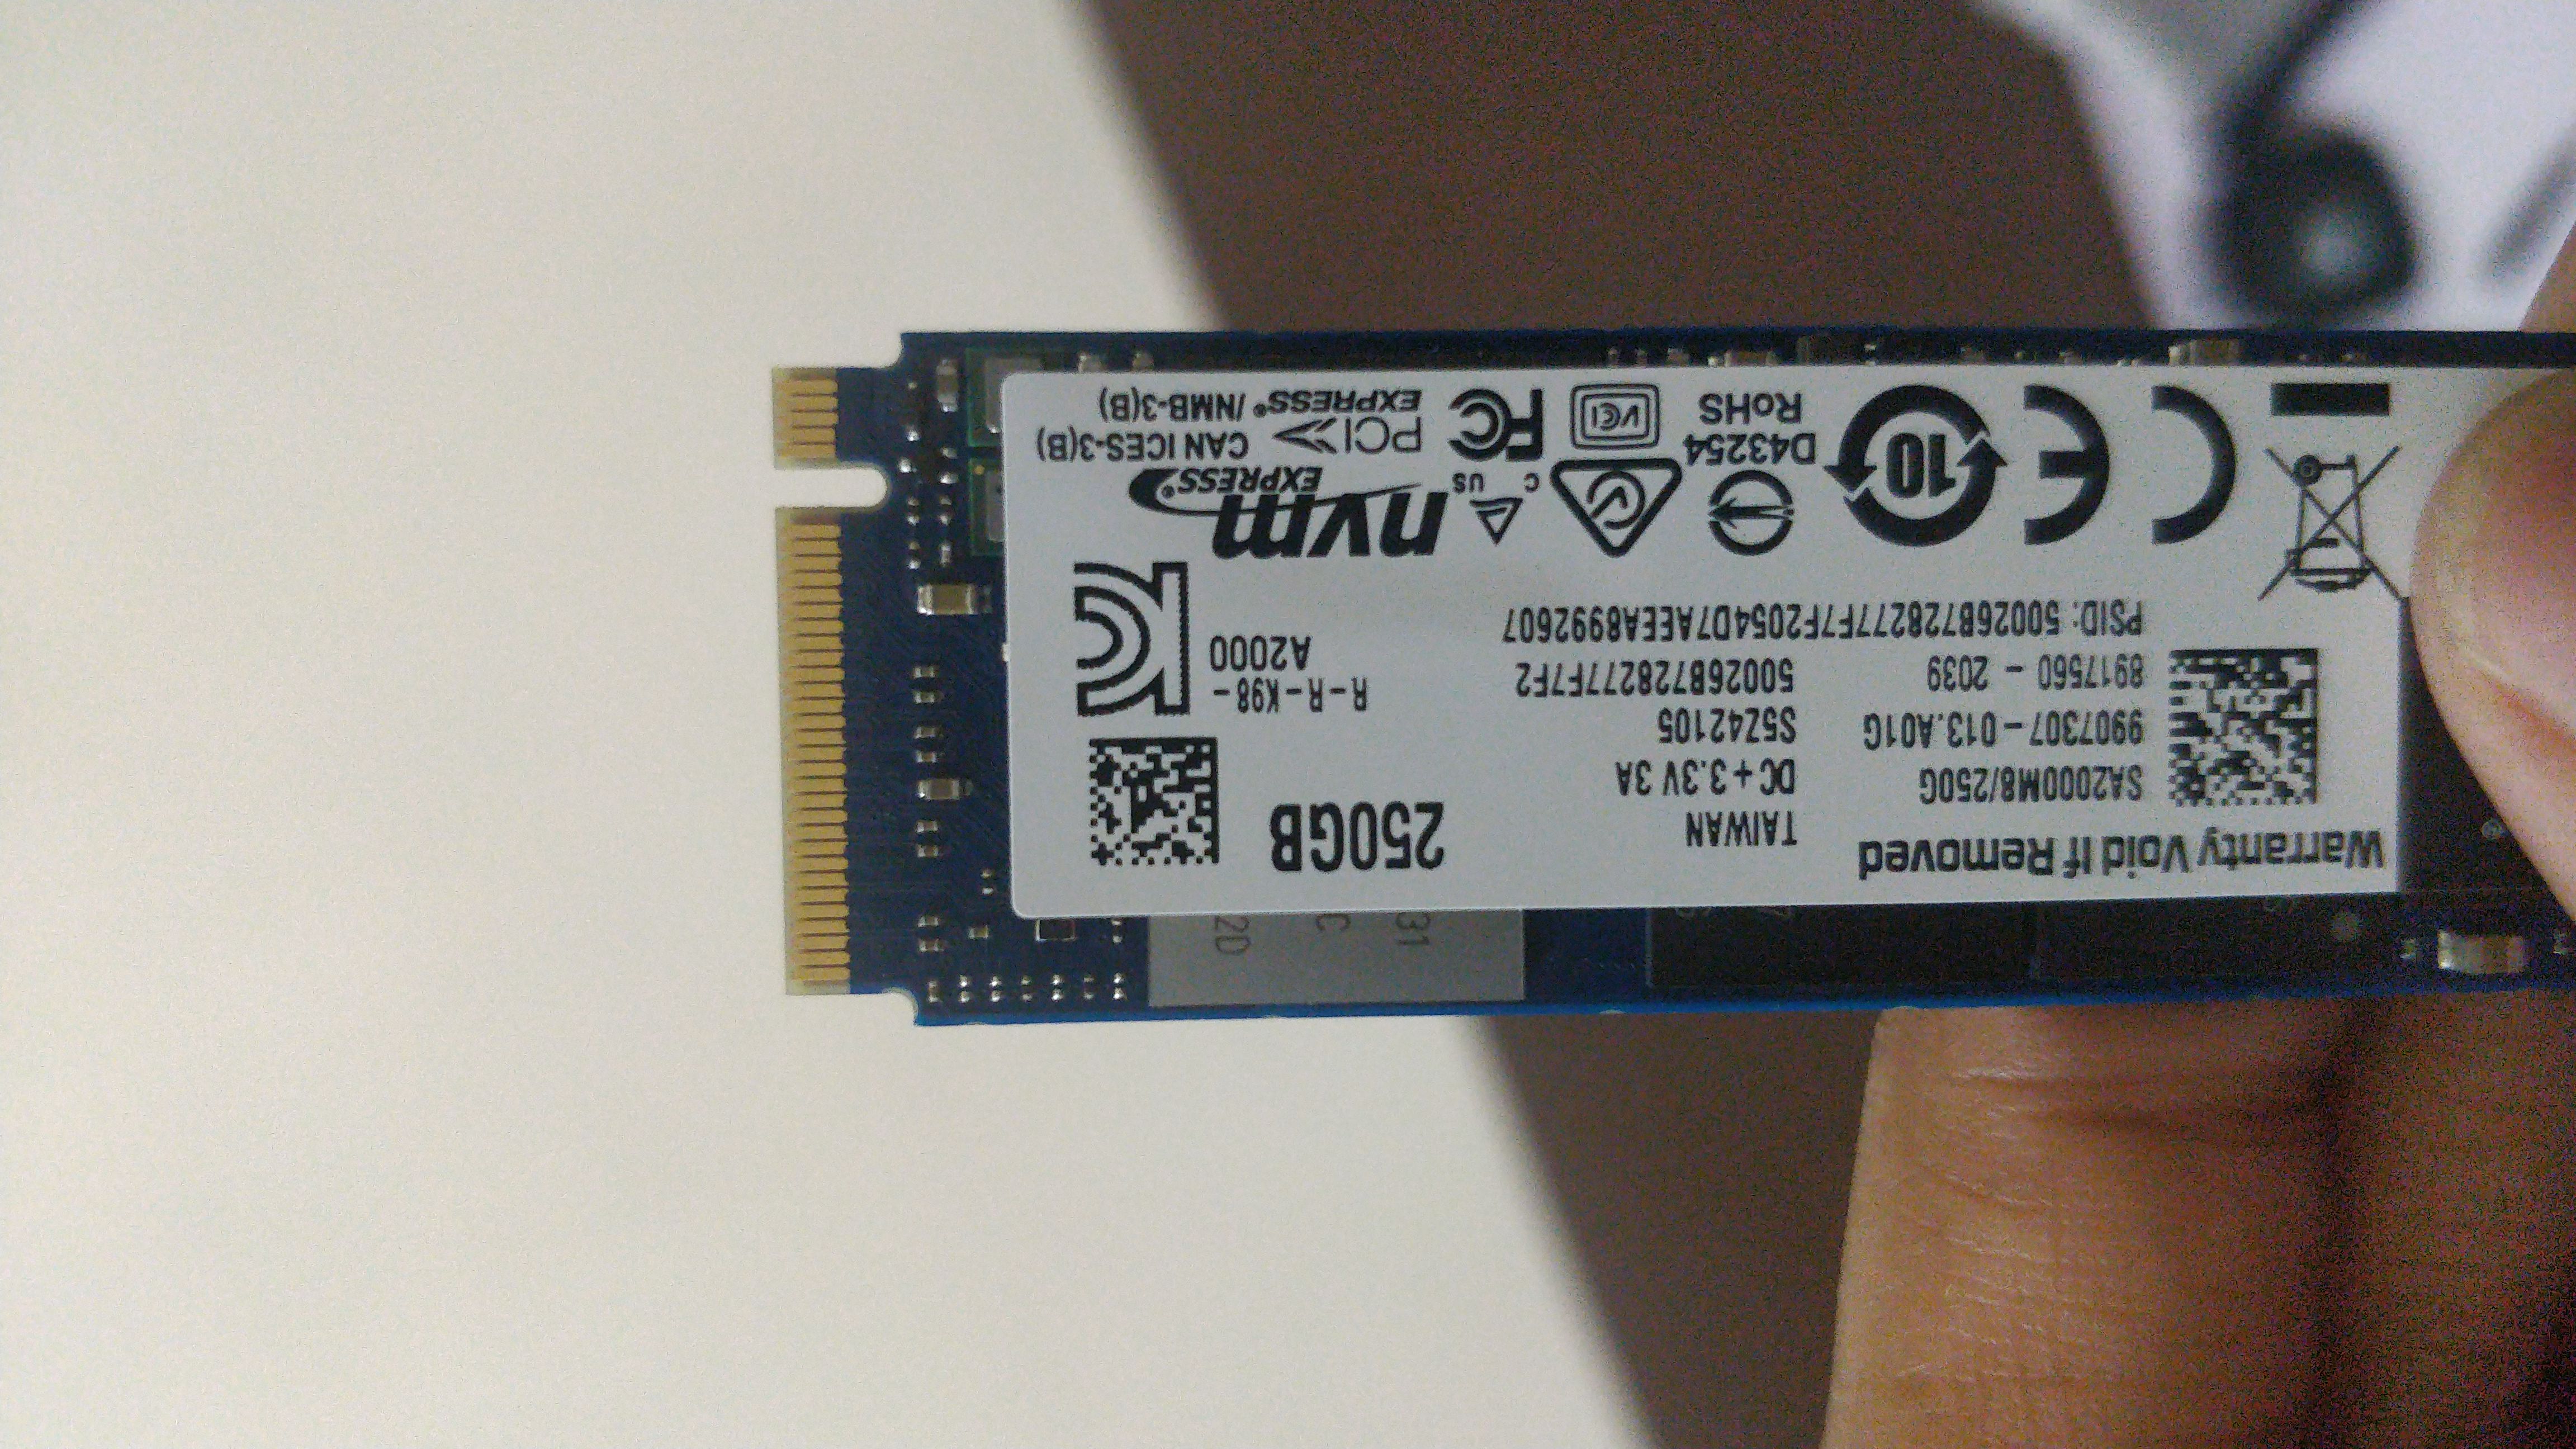 M.2 Nvme card slot - HP Support Community - 7853209